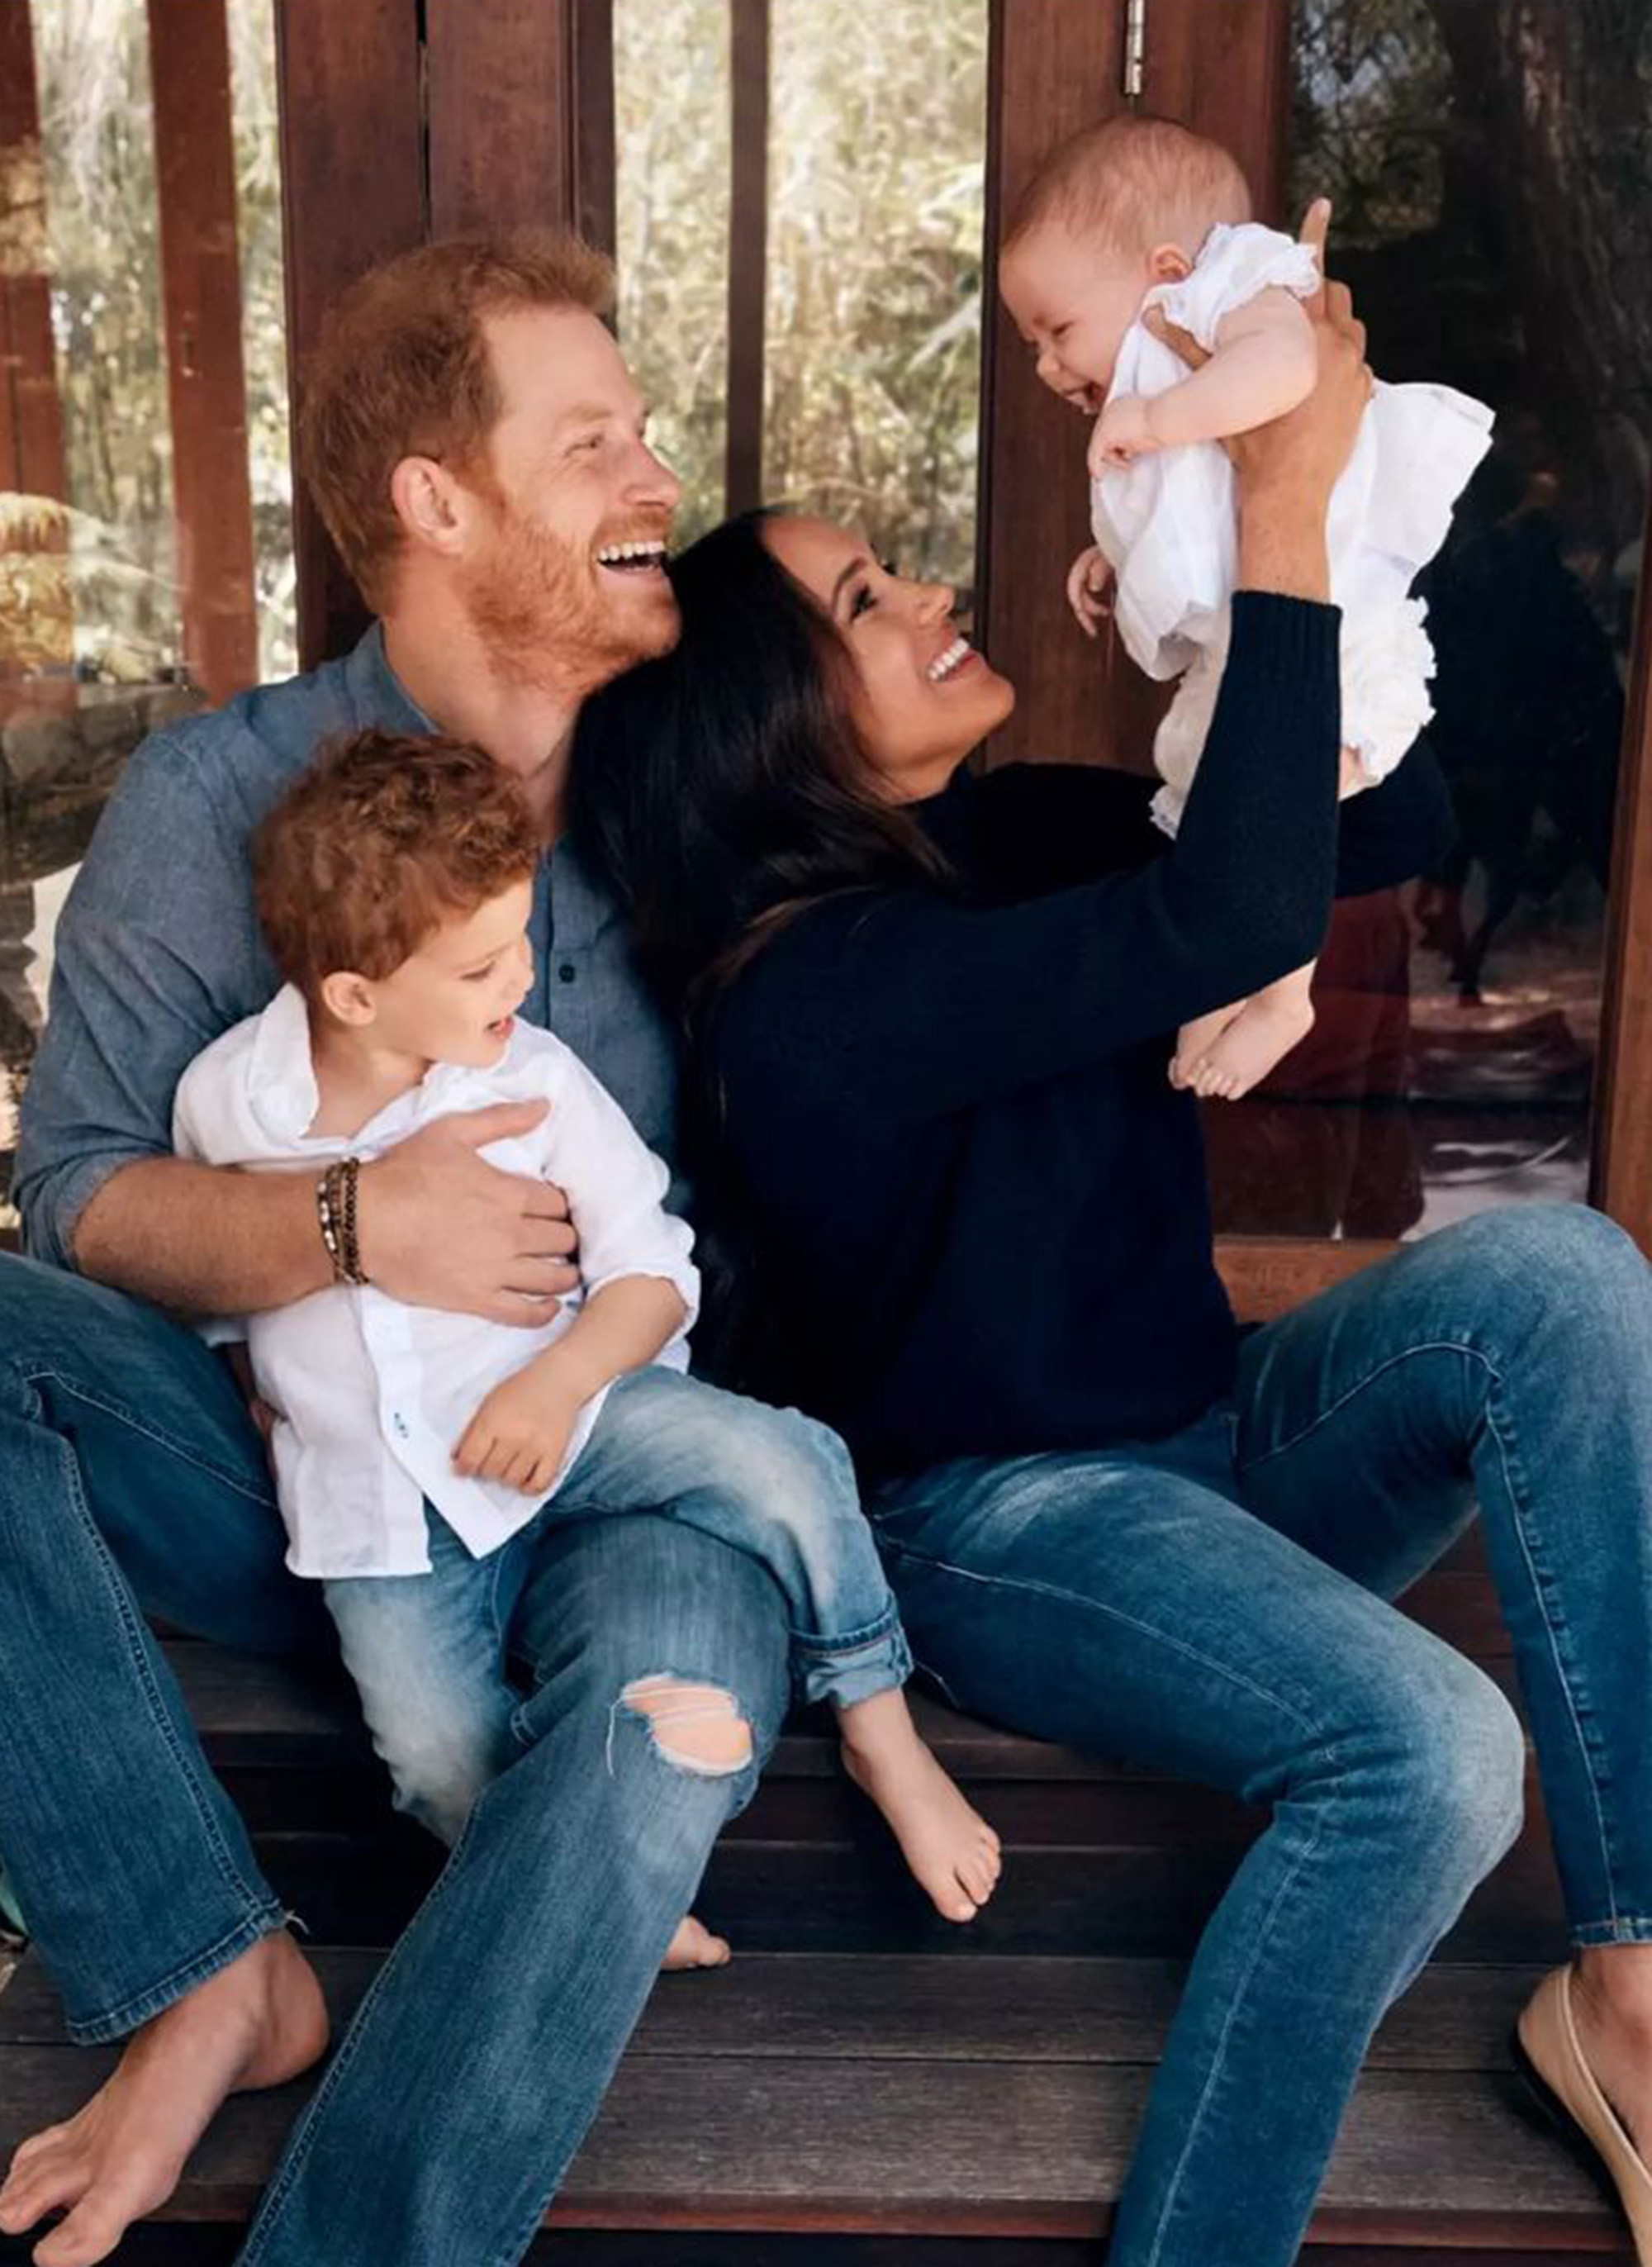 Prince Harry and Meghan Markle with their children Archie and Lilibet.